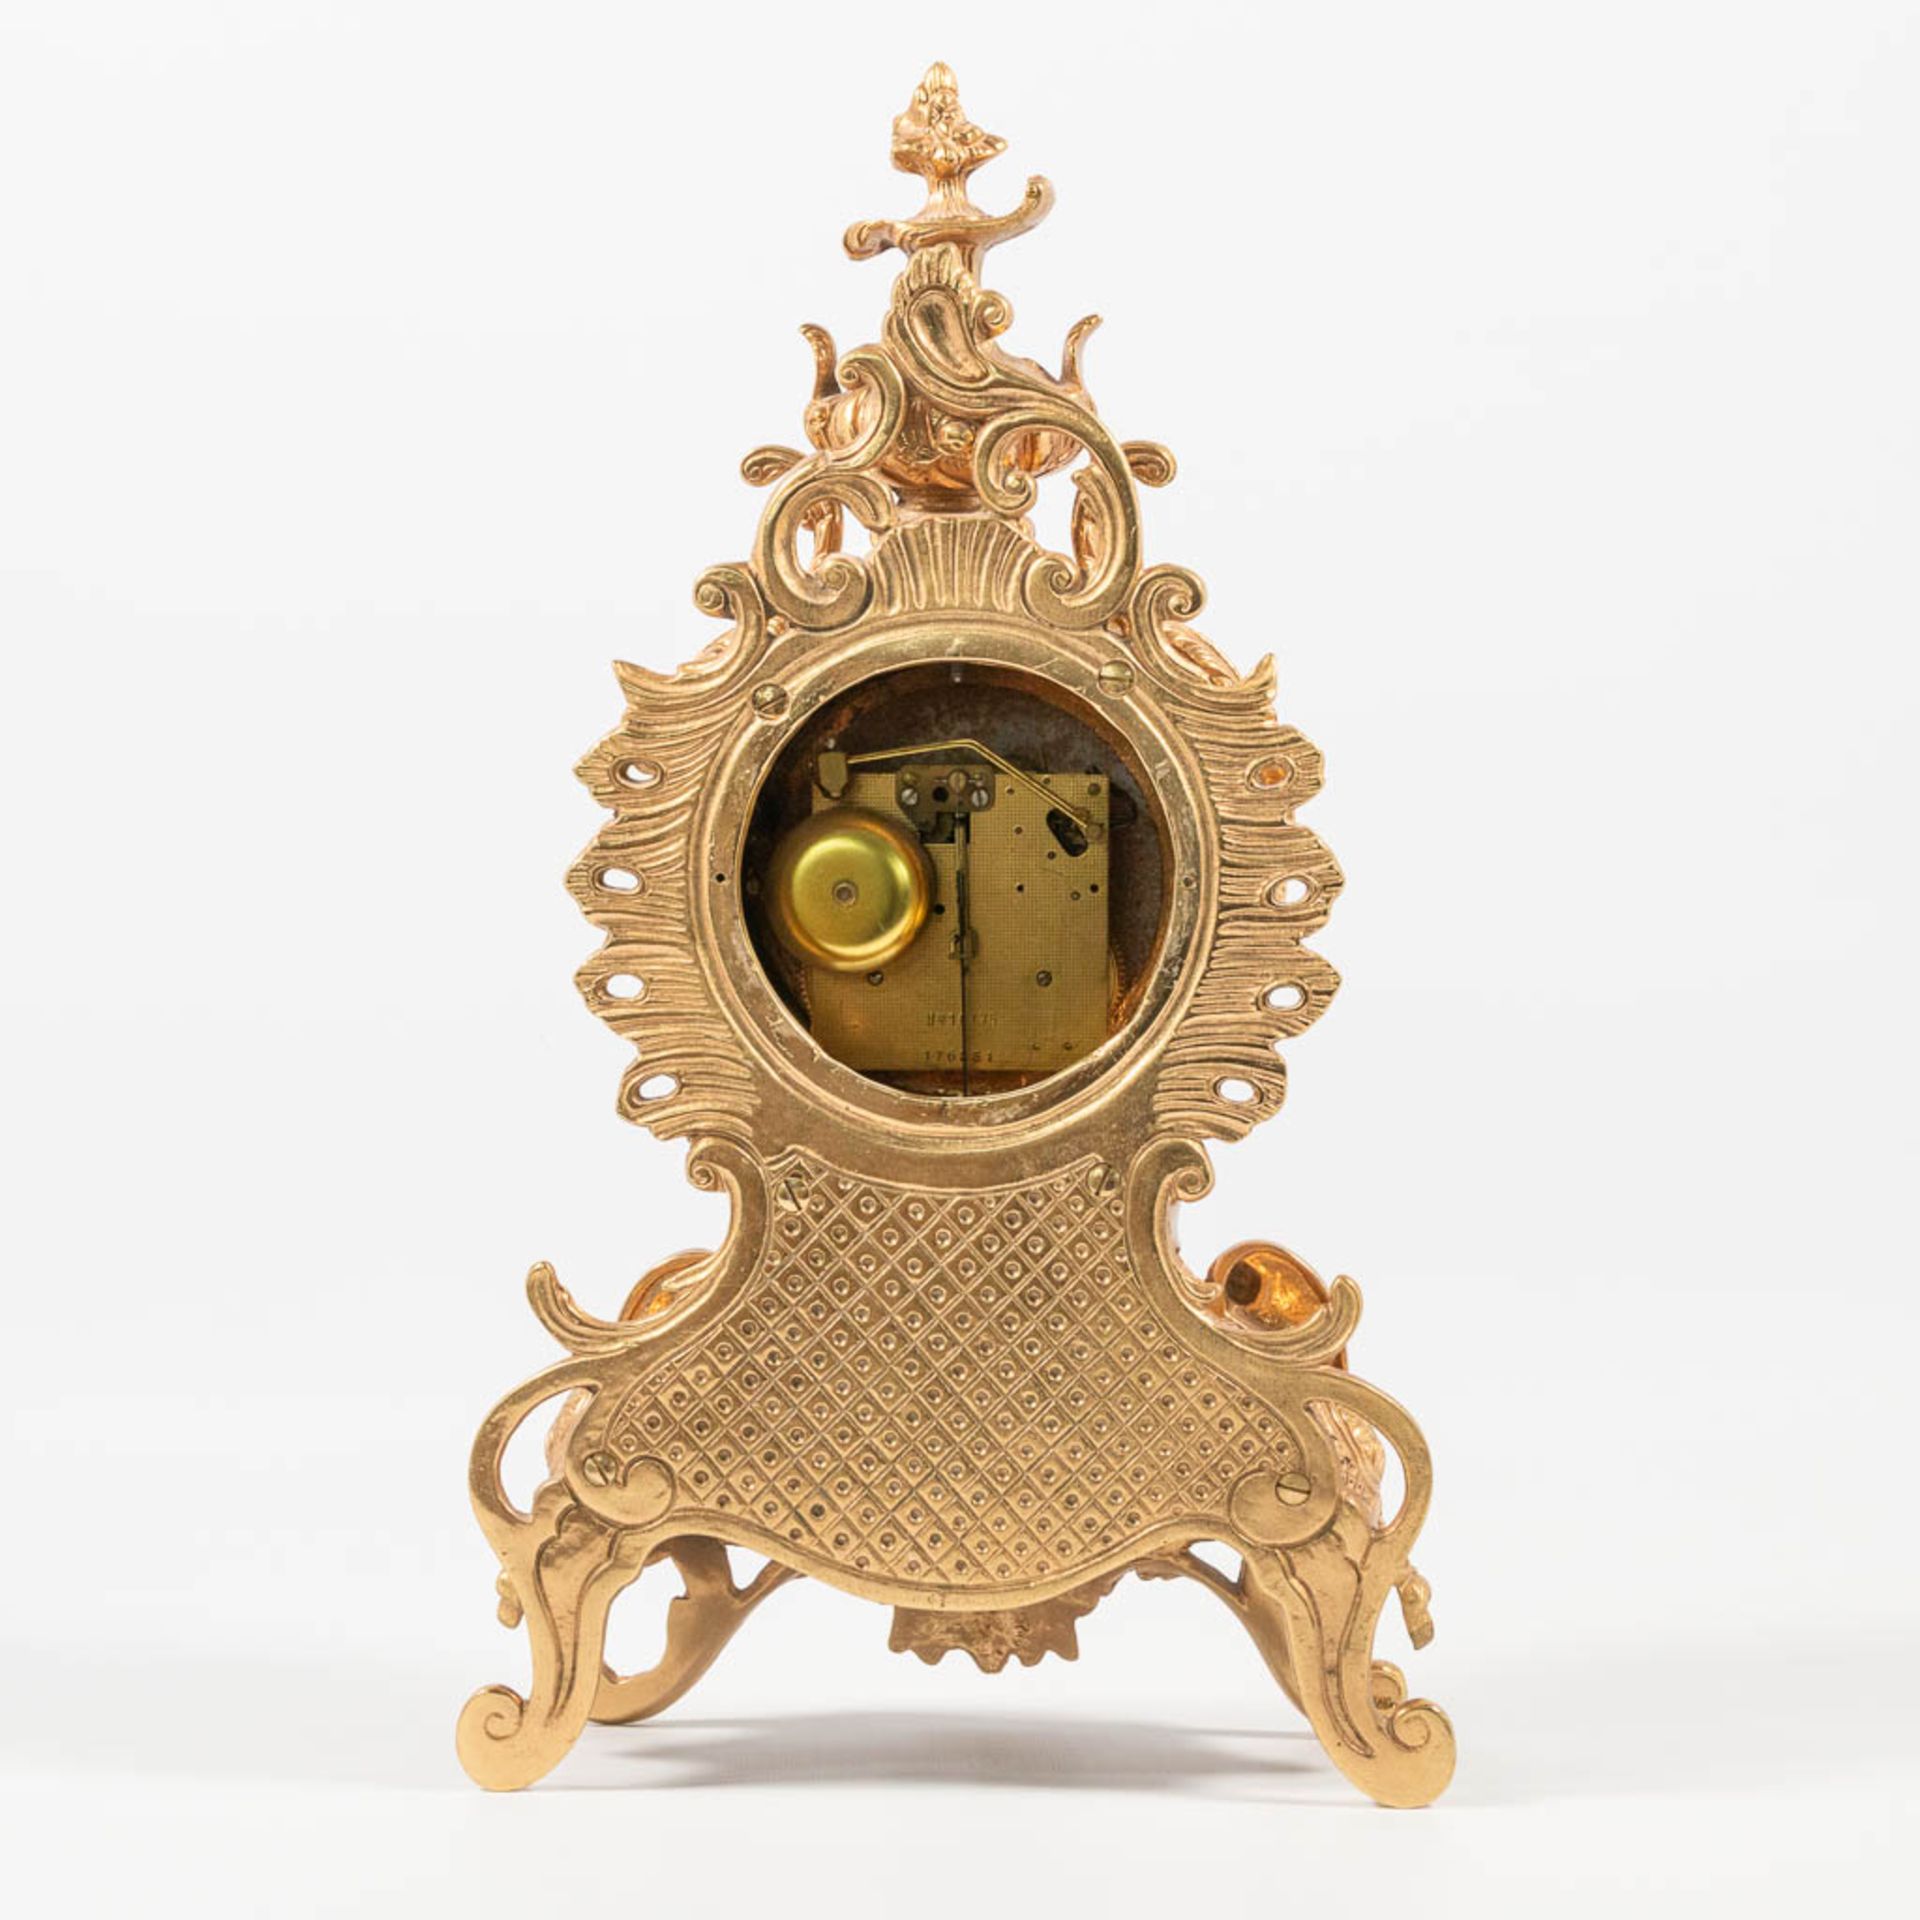 A vintage bronze clock 'Pevanda' with mechanical movement, made around 1970. - Image 10 of 19